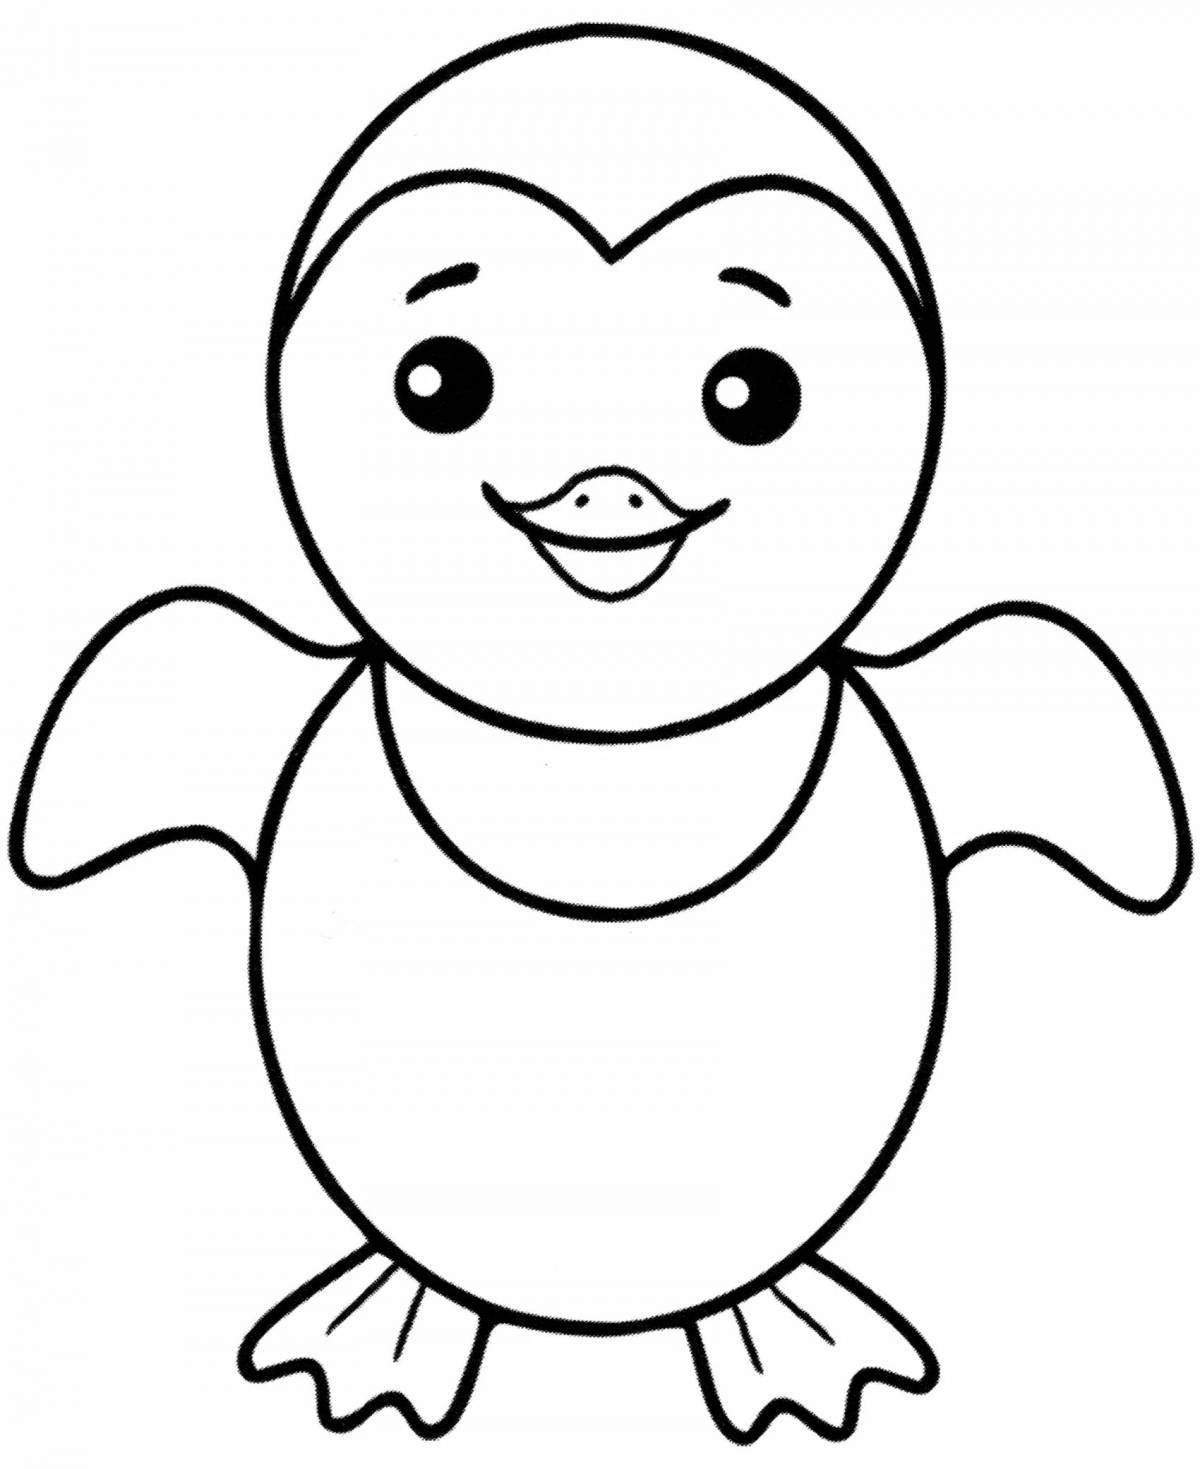 Charming lolo penguin coloring book